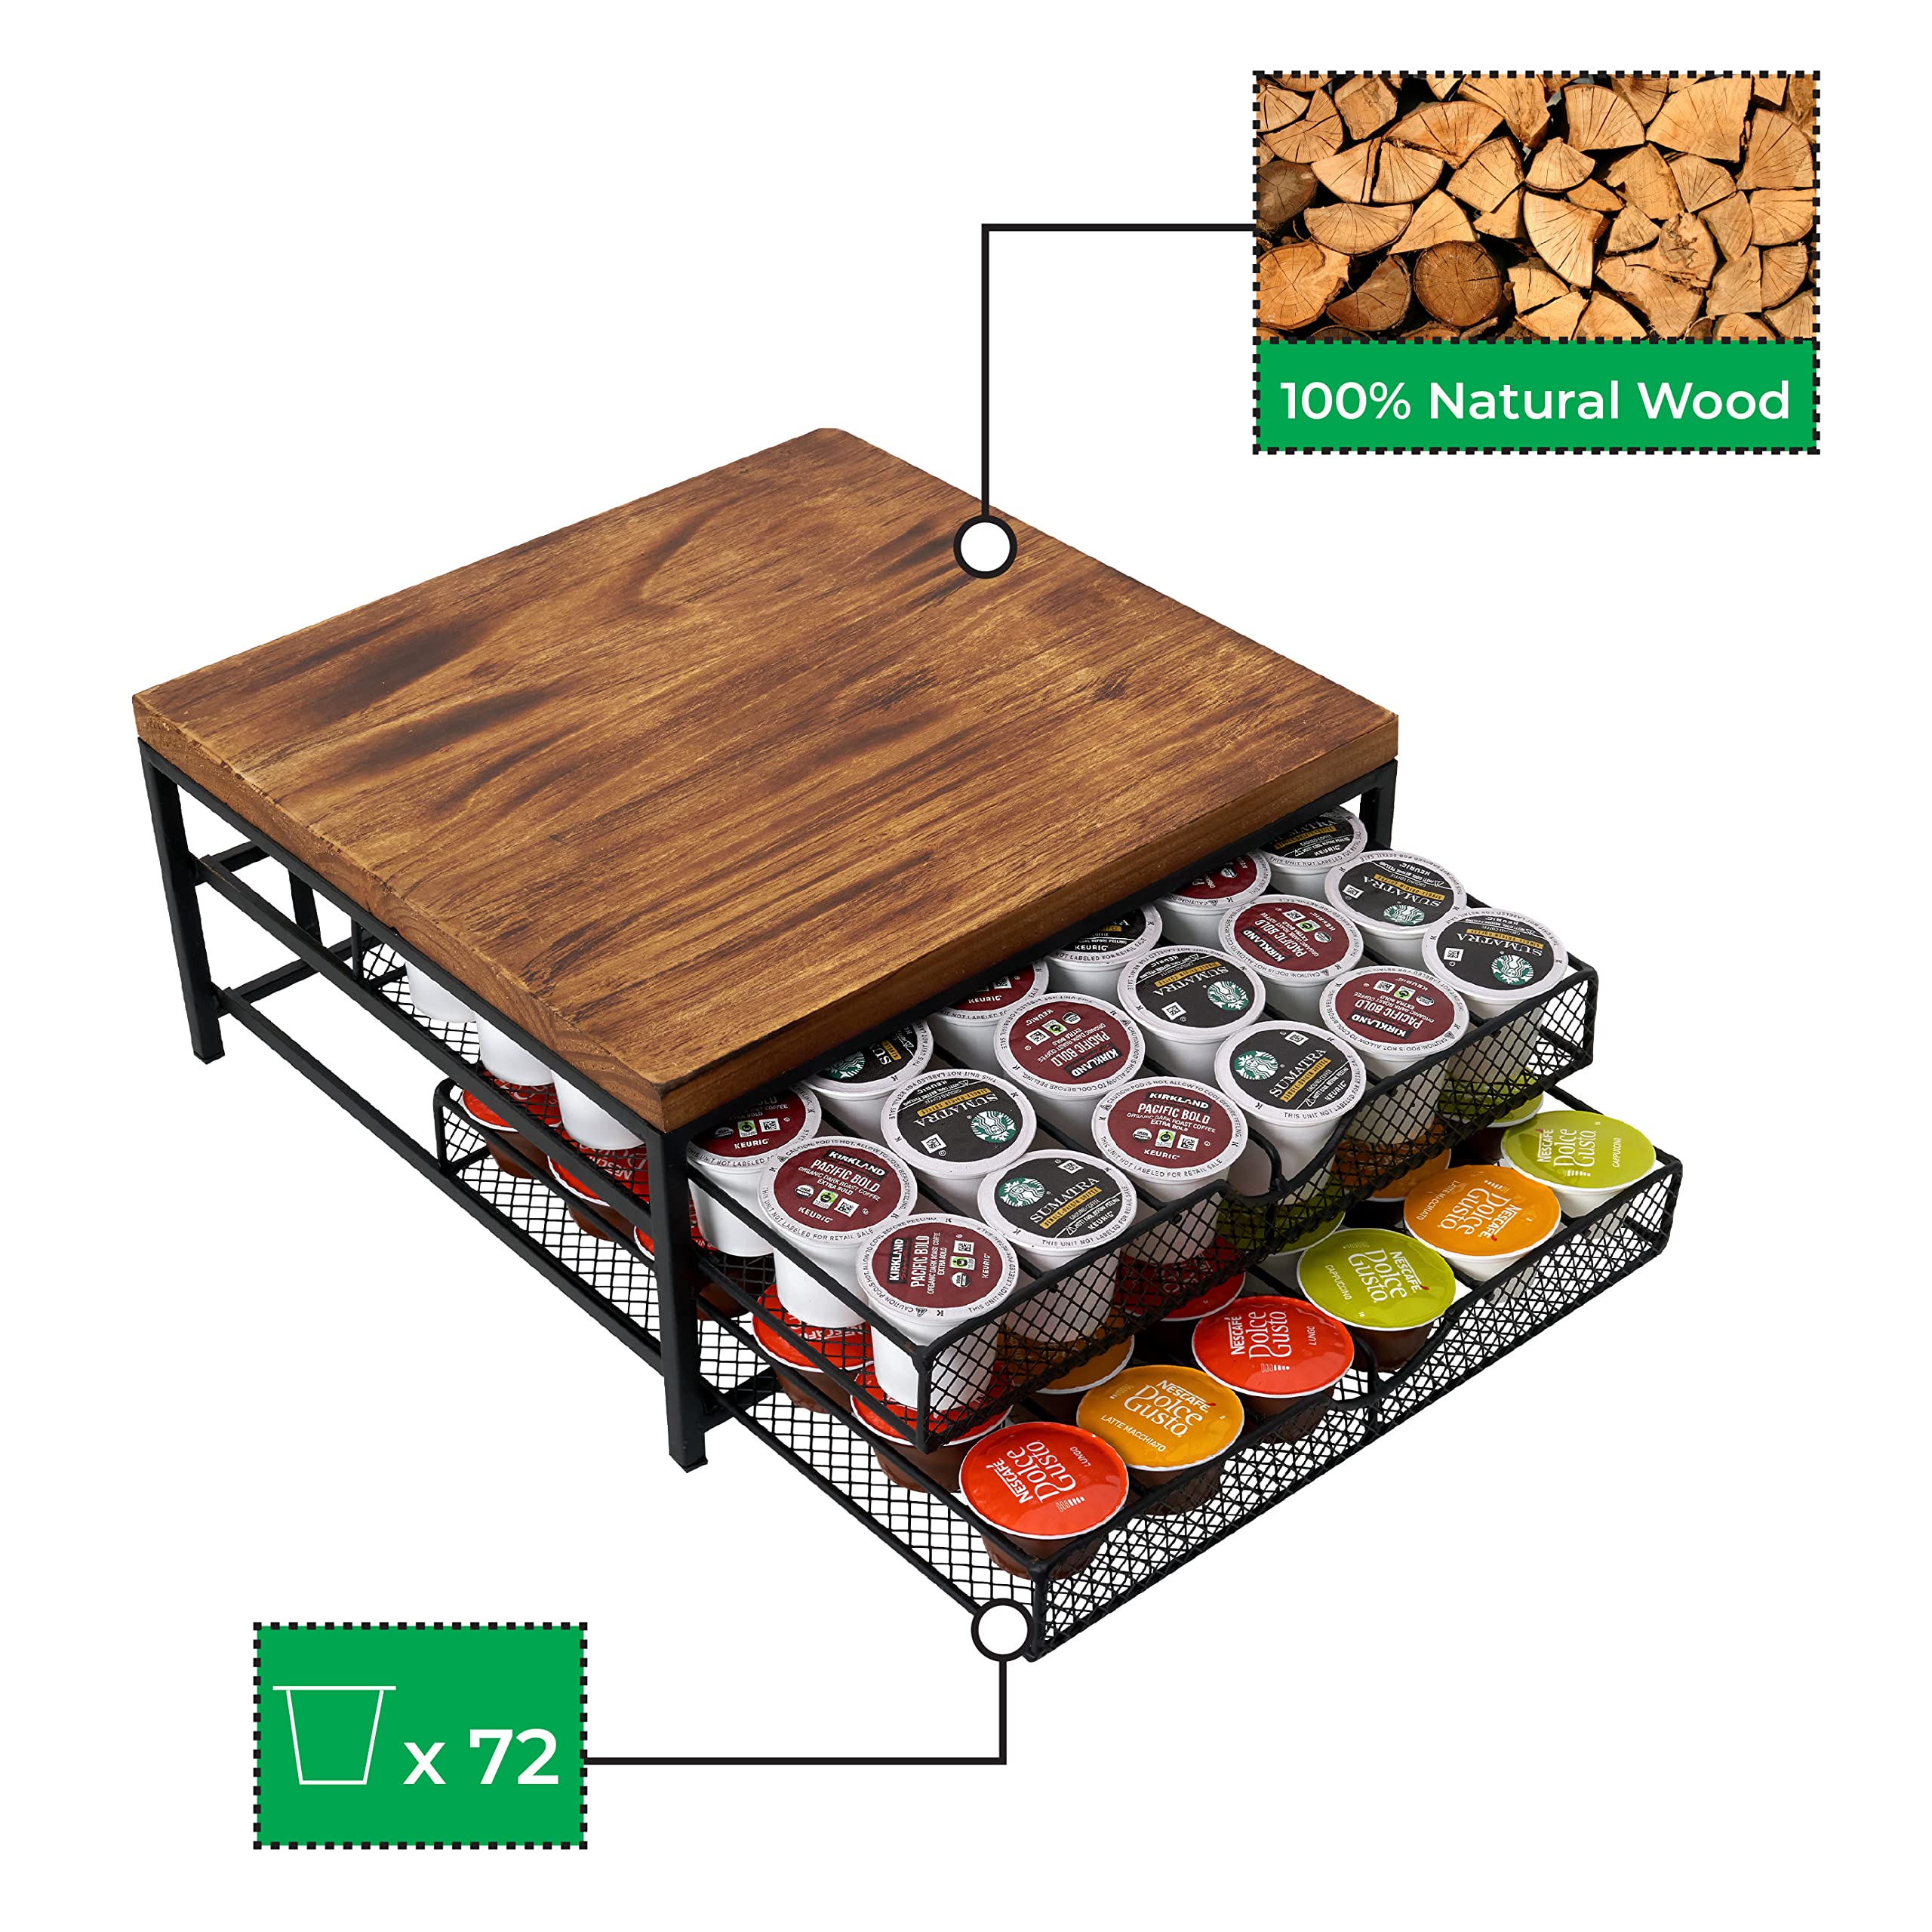 NHZ Coffee Pod Drawer Holder for K cup, 2-Tier Coffee Pod Drawer Holder Organizer, No Assembly Required, K Cup Holder with 72 Capacity Capsule Pods. K Cup Organizer Suit for Home Office,Kitchen